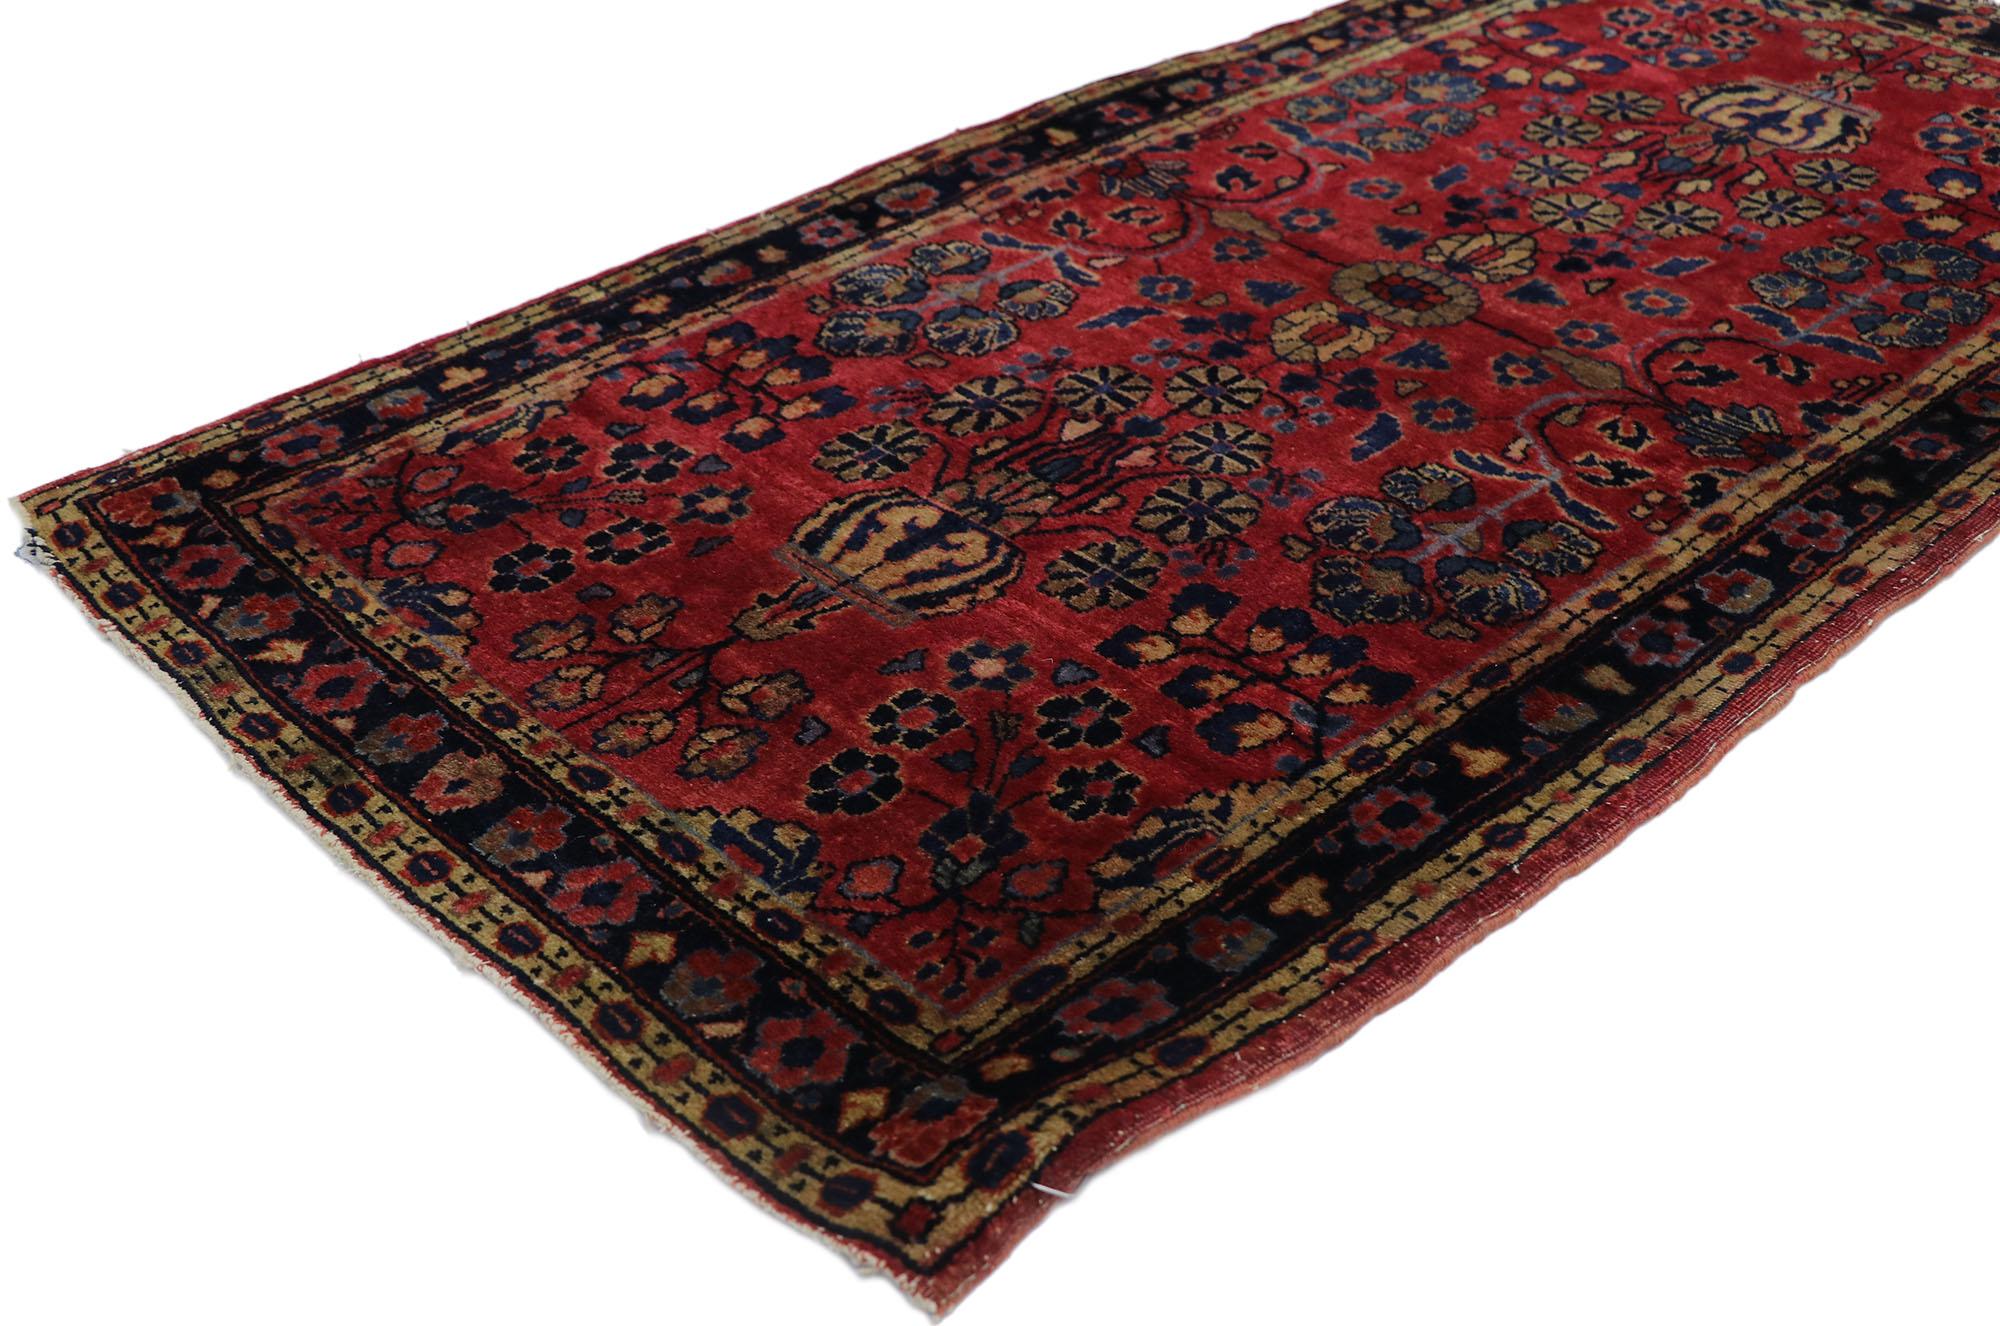 78122 Antique Persian Sarouk rug, 02'01 x 04'02. ?Emating traditional style with incredible detail and texture, this hand knotted antique Persian Sarouk rug is a captivating vision of woven beauty. The timeless vase design and rich color palette